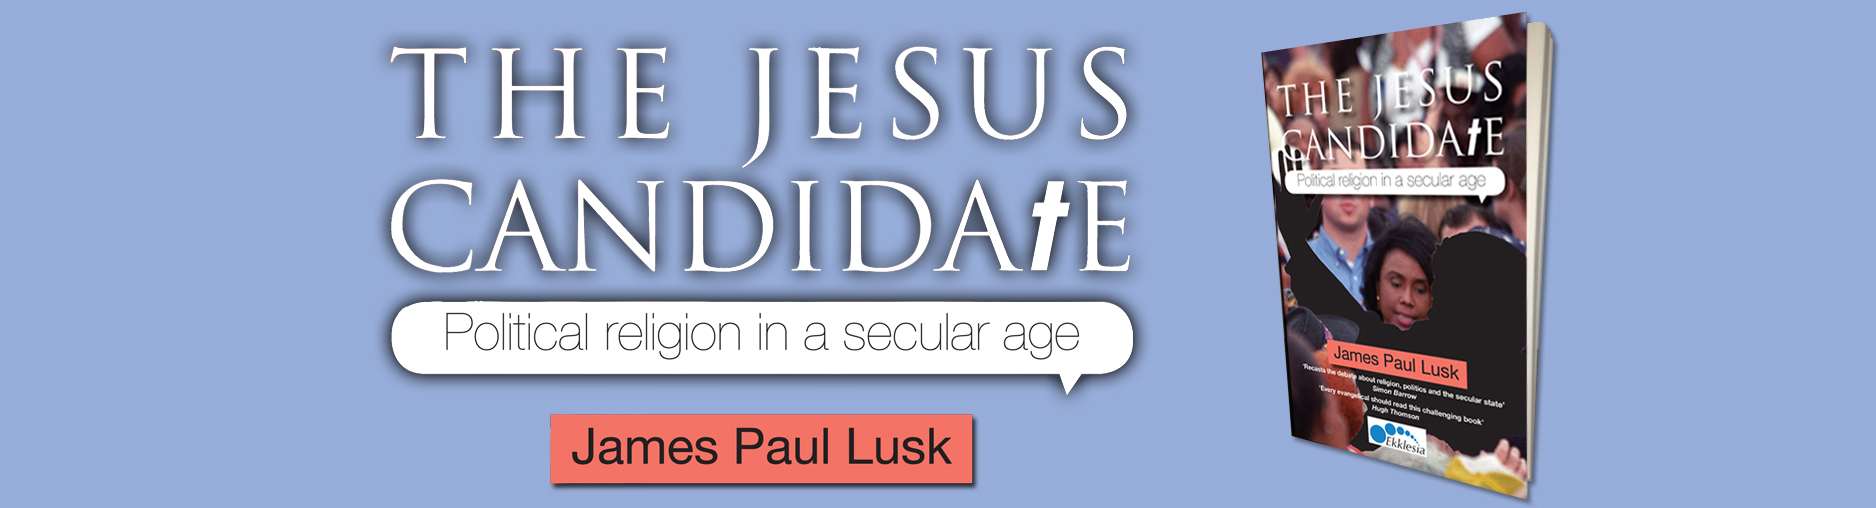 The Jesus Candidate by James Paul Lusk